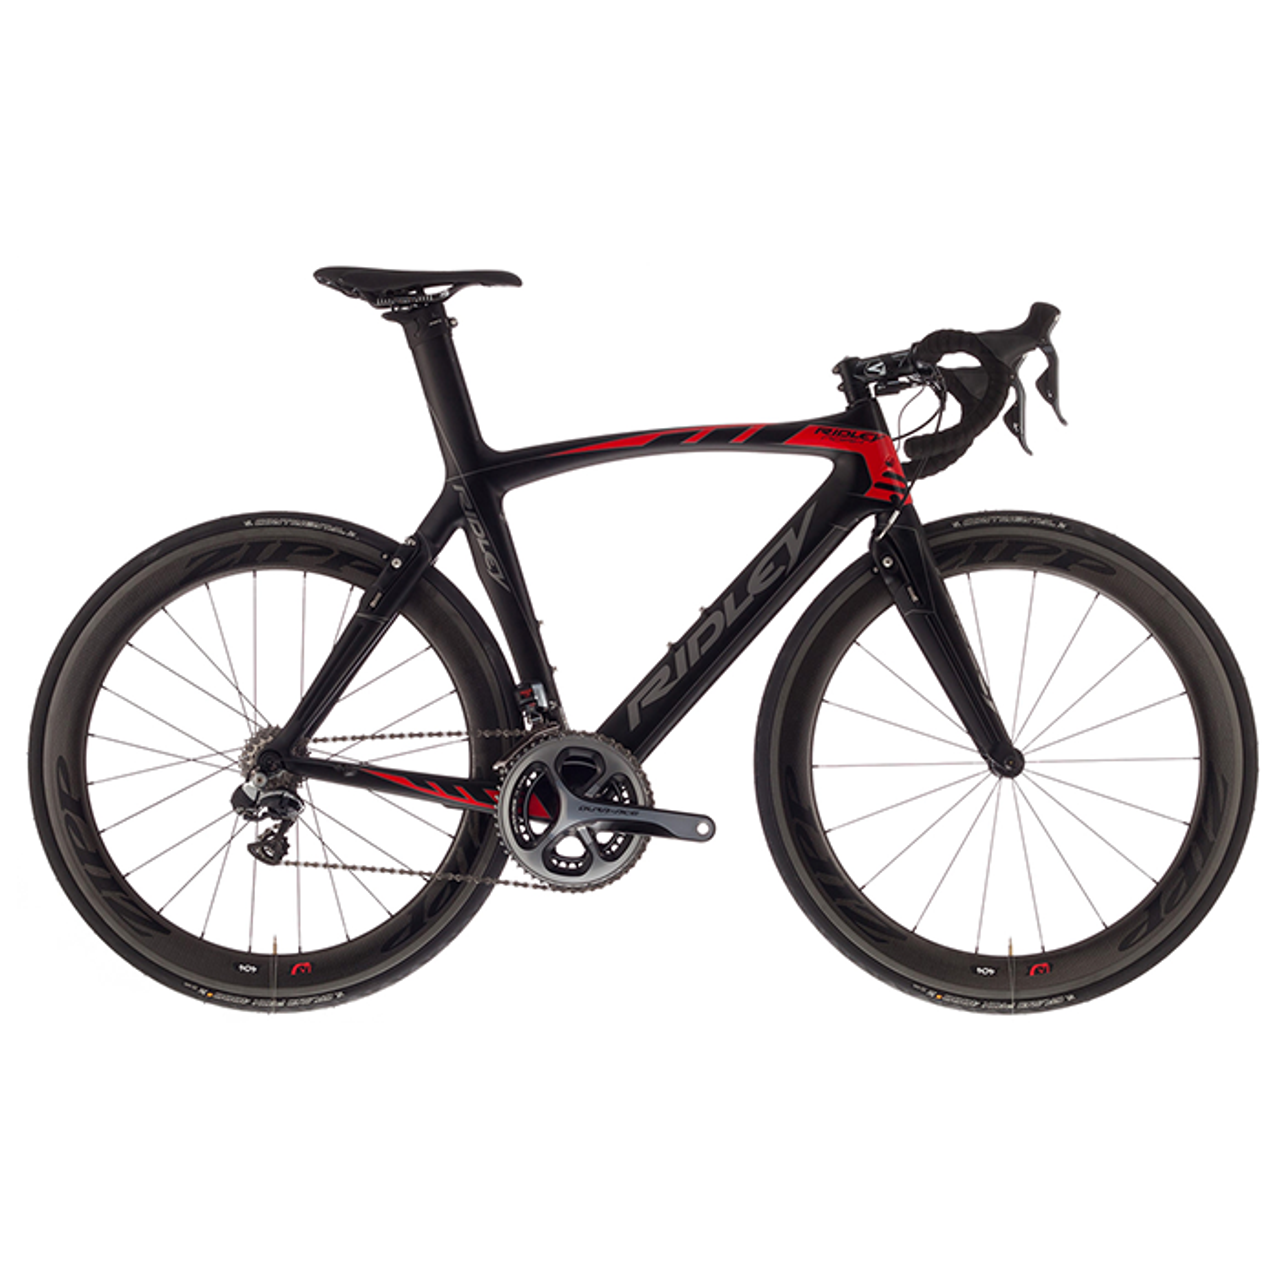 Texas Cyclesport Ridley Noah Fast Campagnolo Ergo equipped Carbon Bicycle, Black and Red